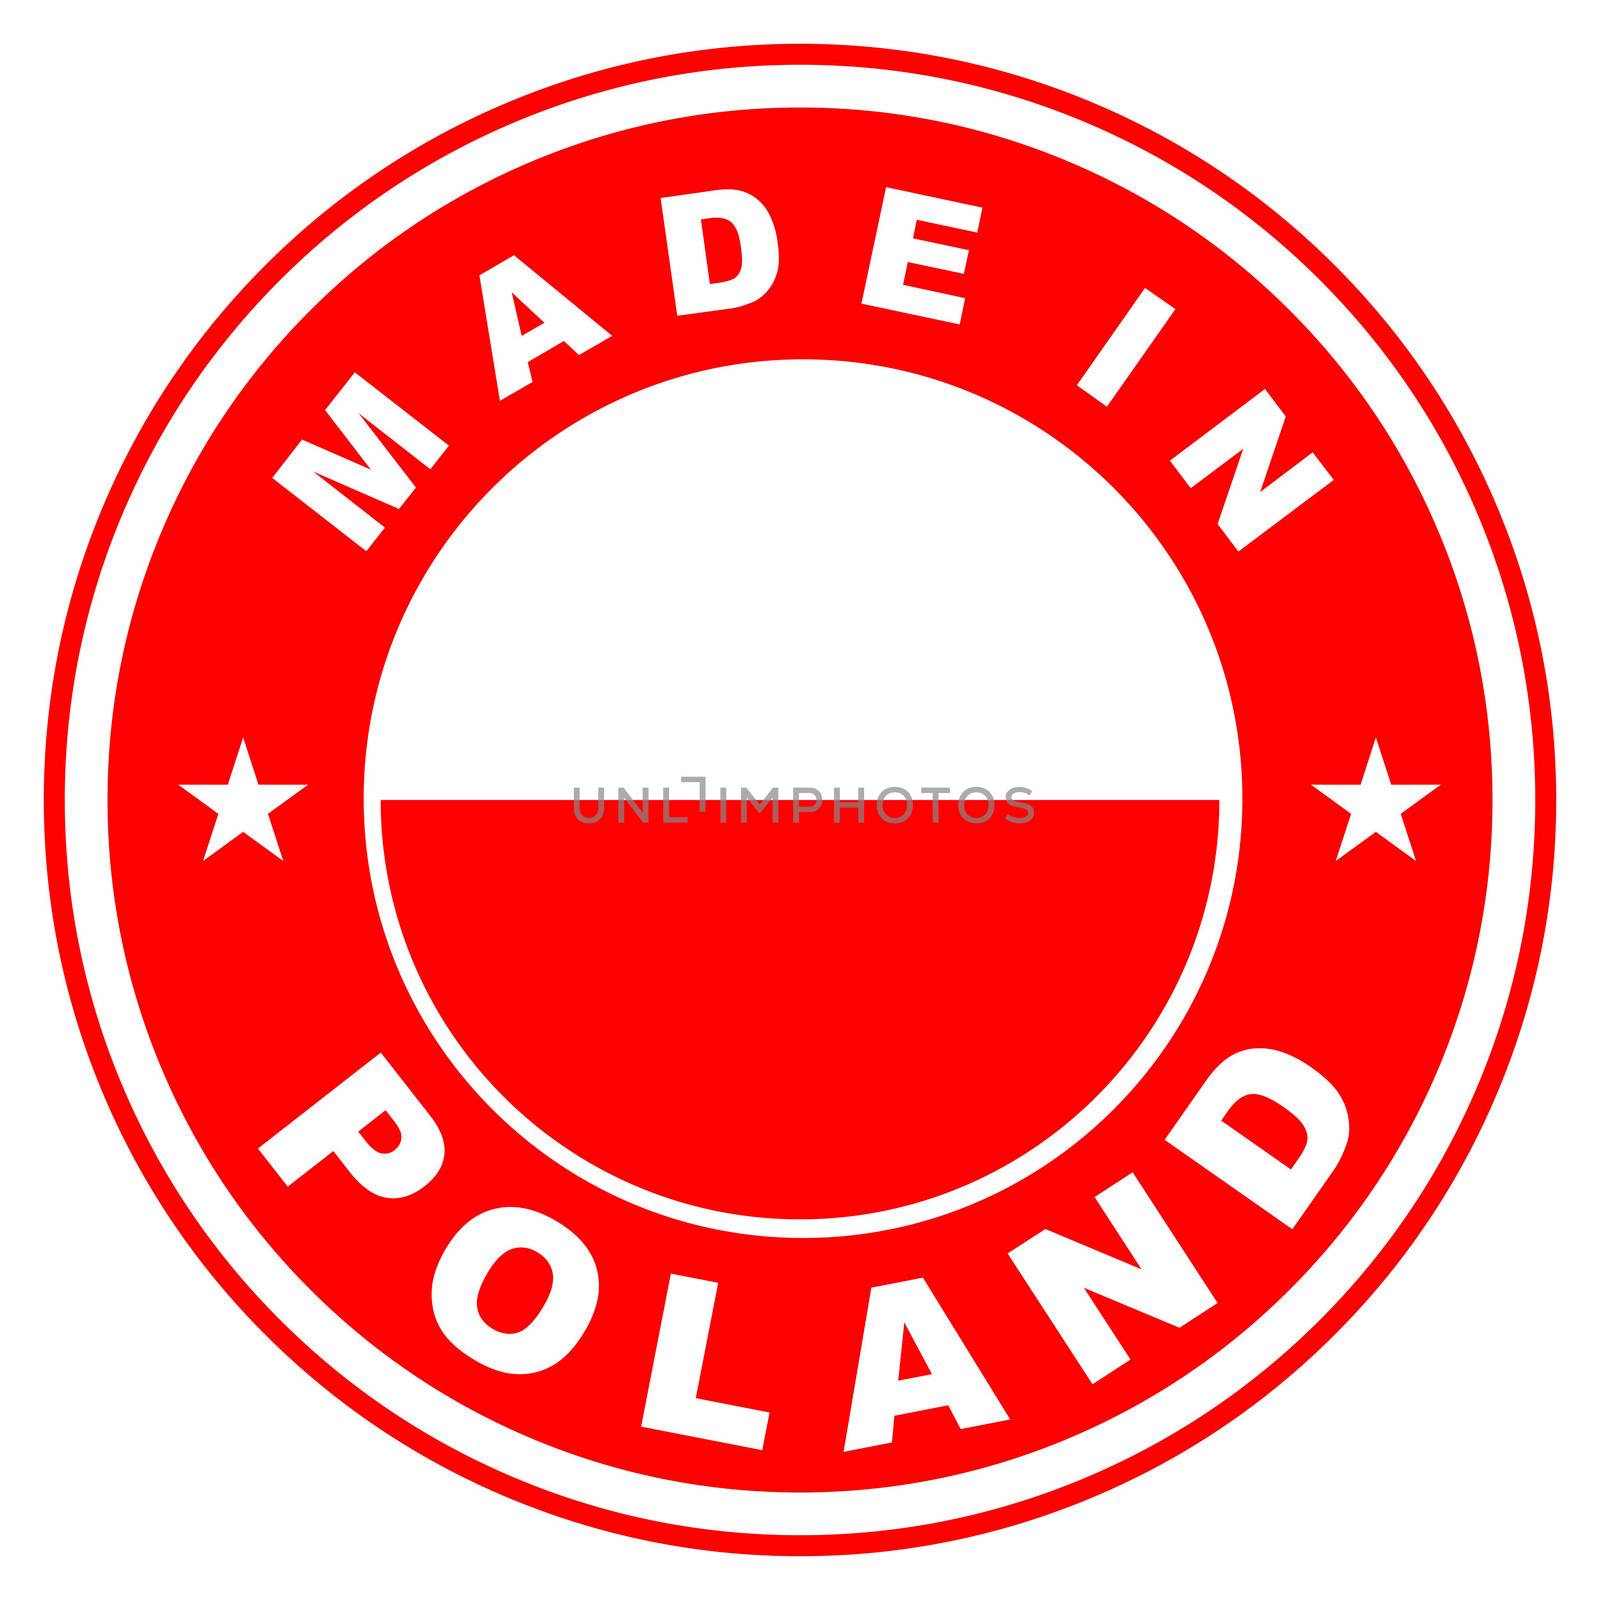 very big size made in poland country label